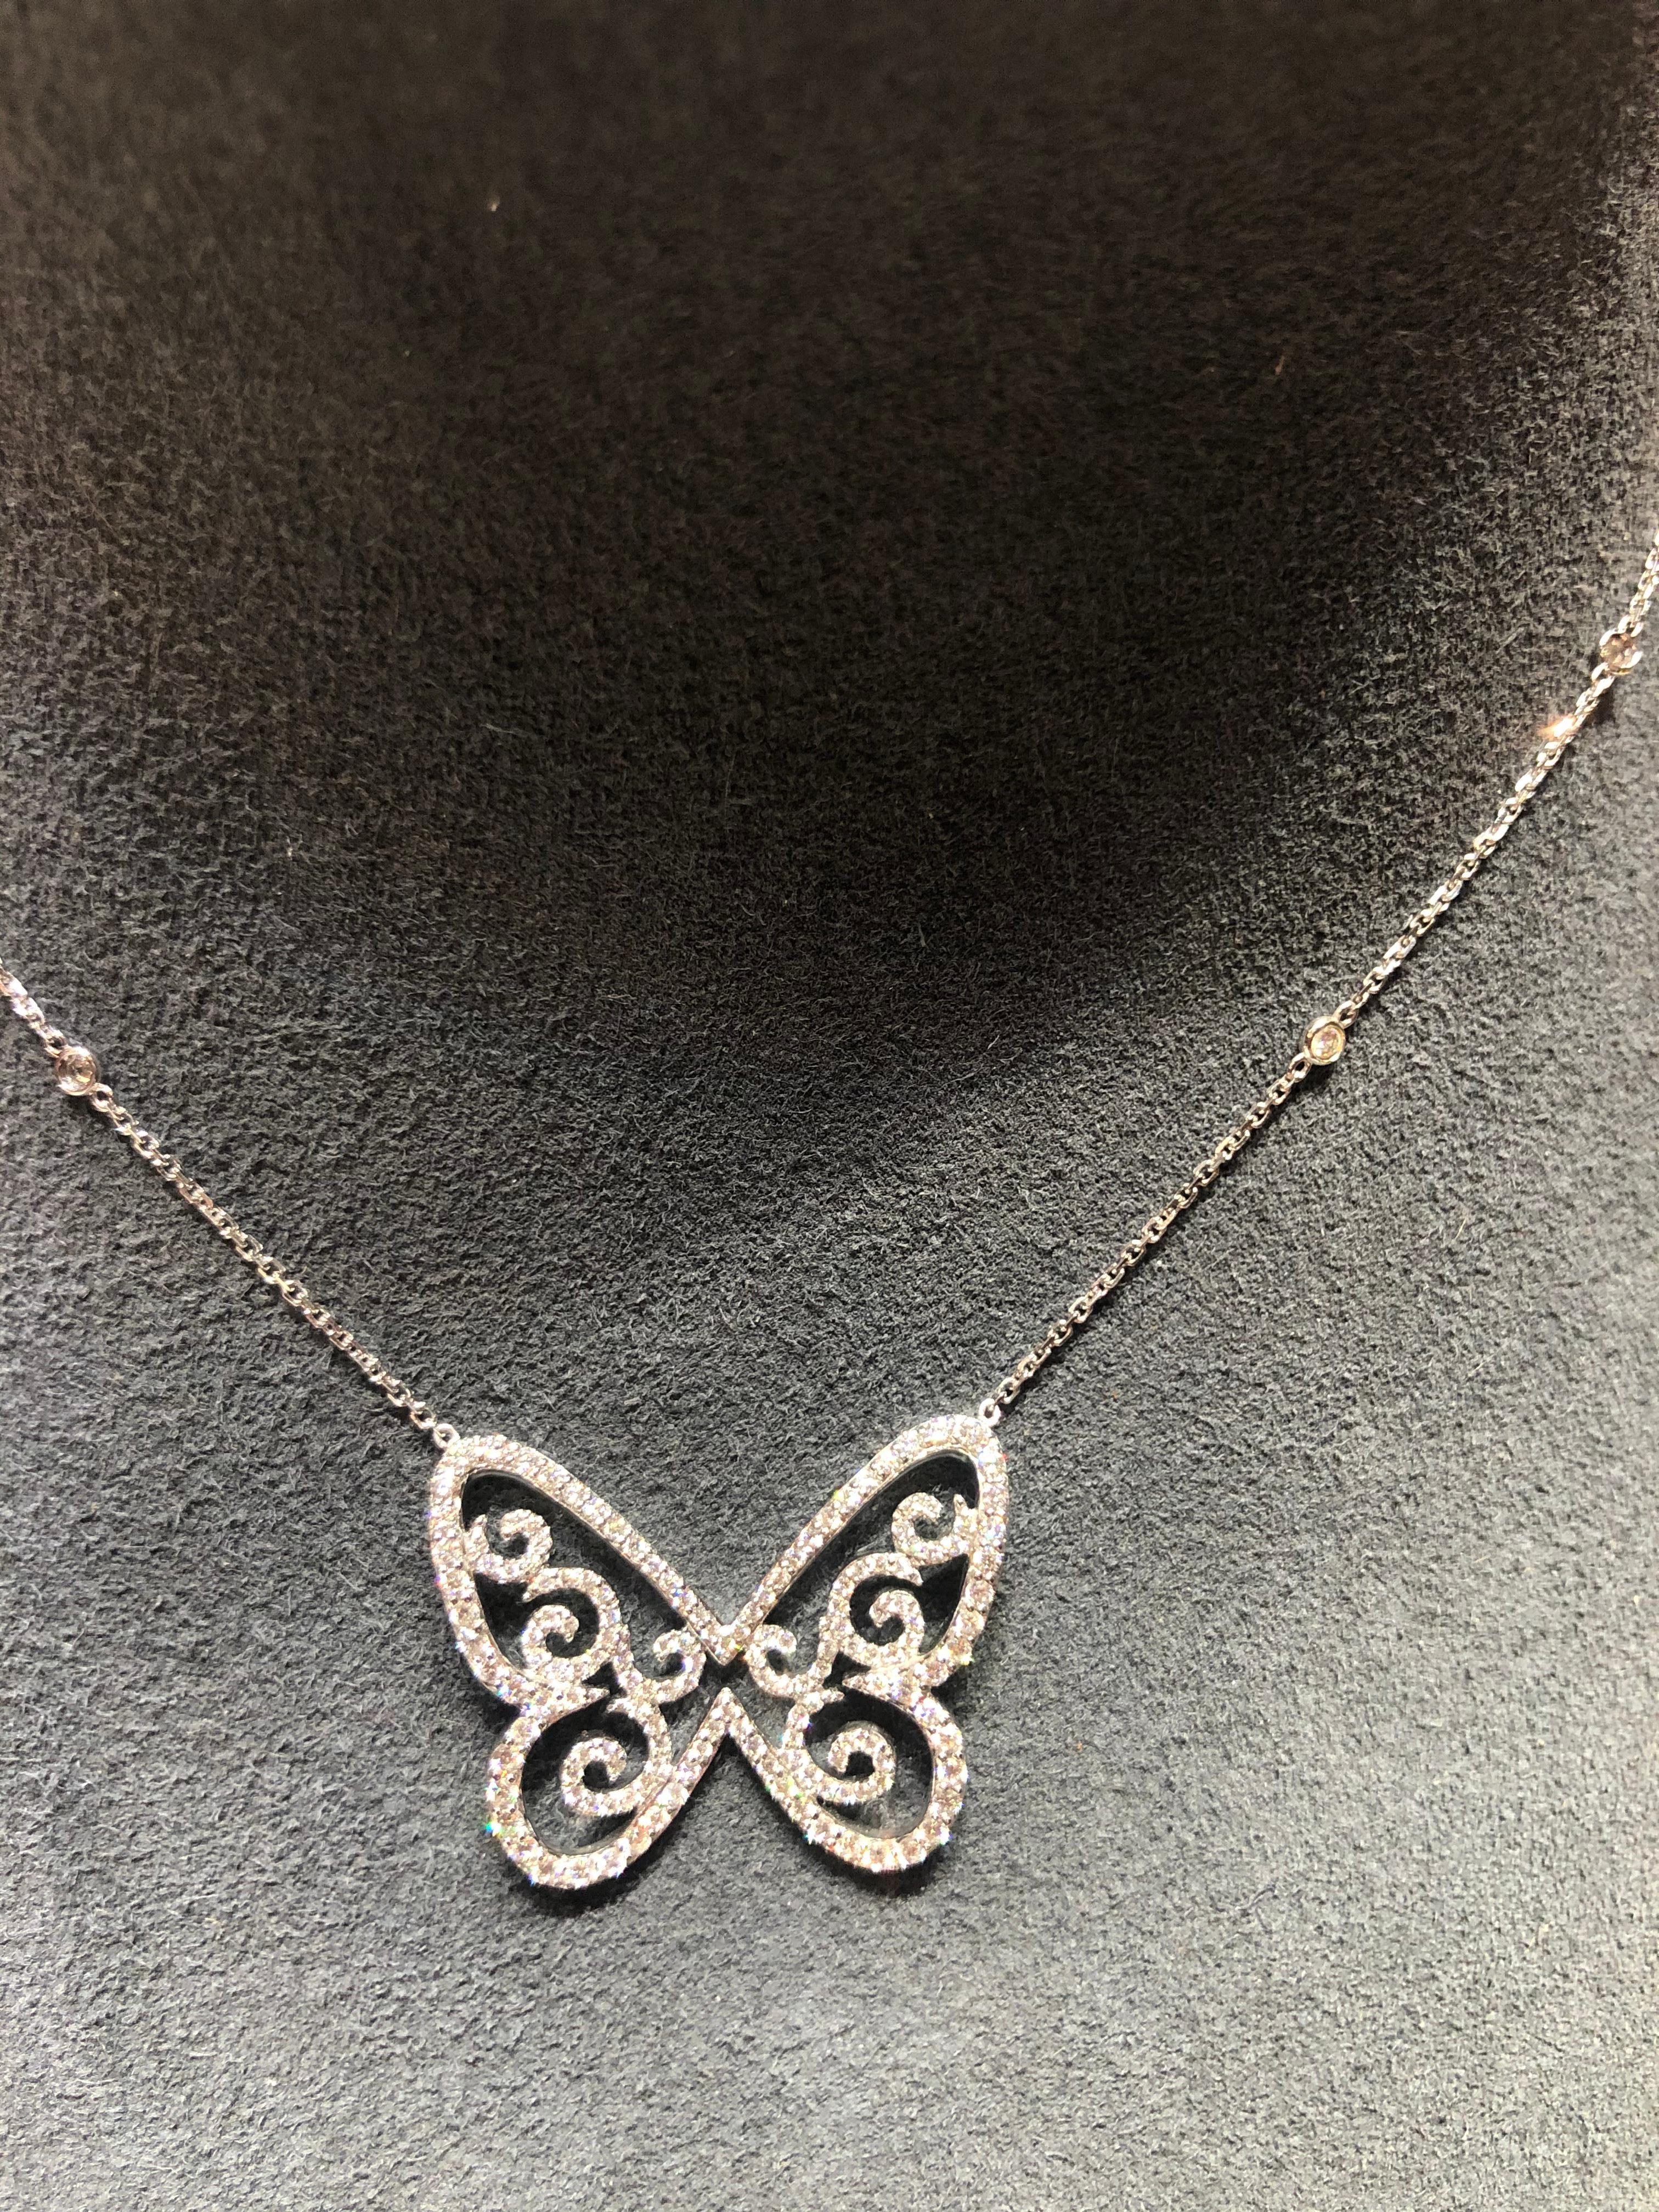 A beautiful diamond Butterfly 'Arabesque' necklace made in 18K White Gold set with White Diamonds weighing 0.83cts, Handcrafted by the Paris design house, Messika, this lovely diamond necklace is in perfect condition and has never been worn.  The